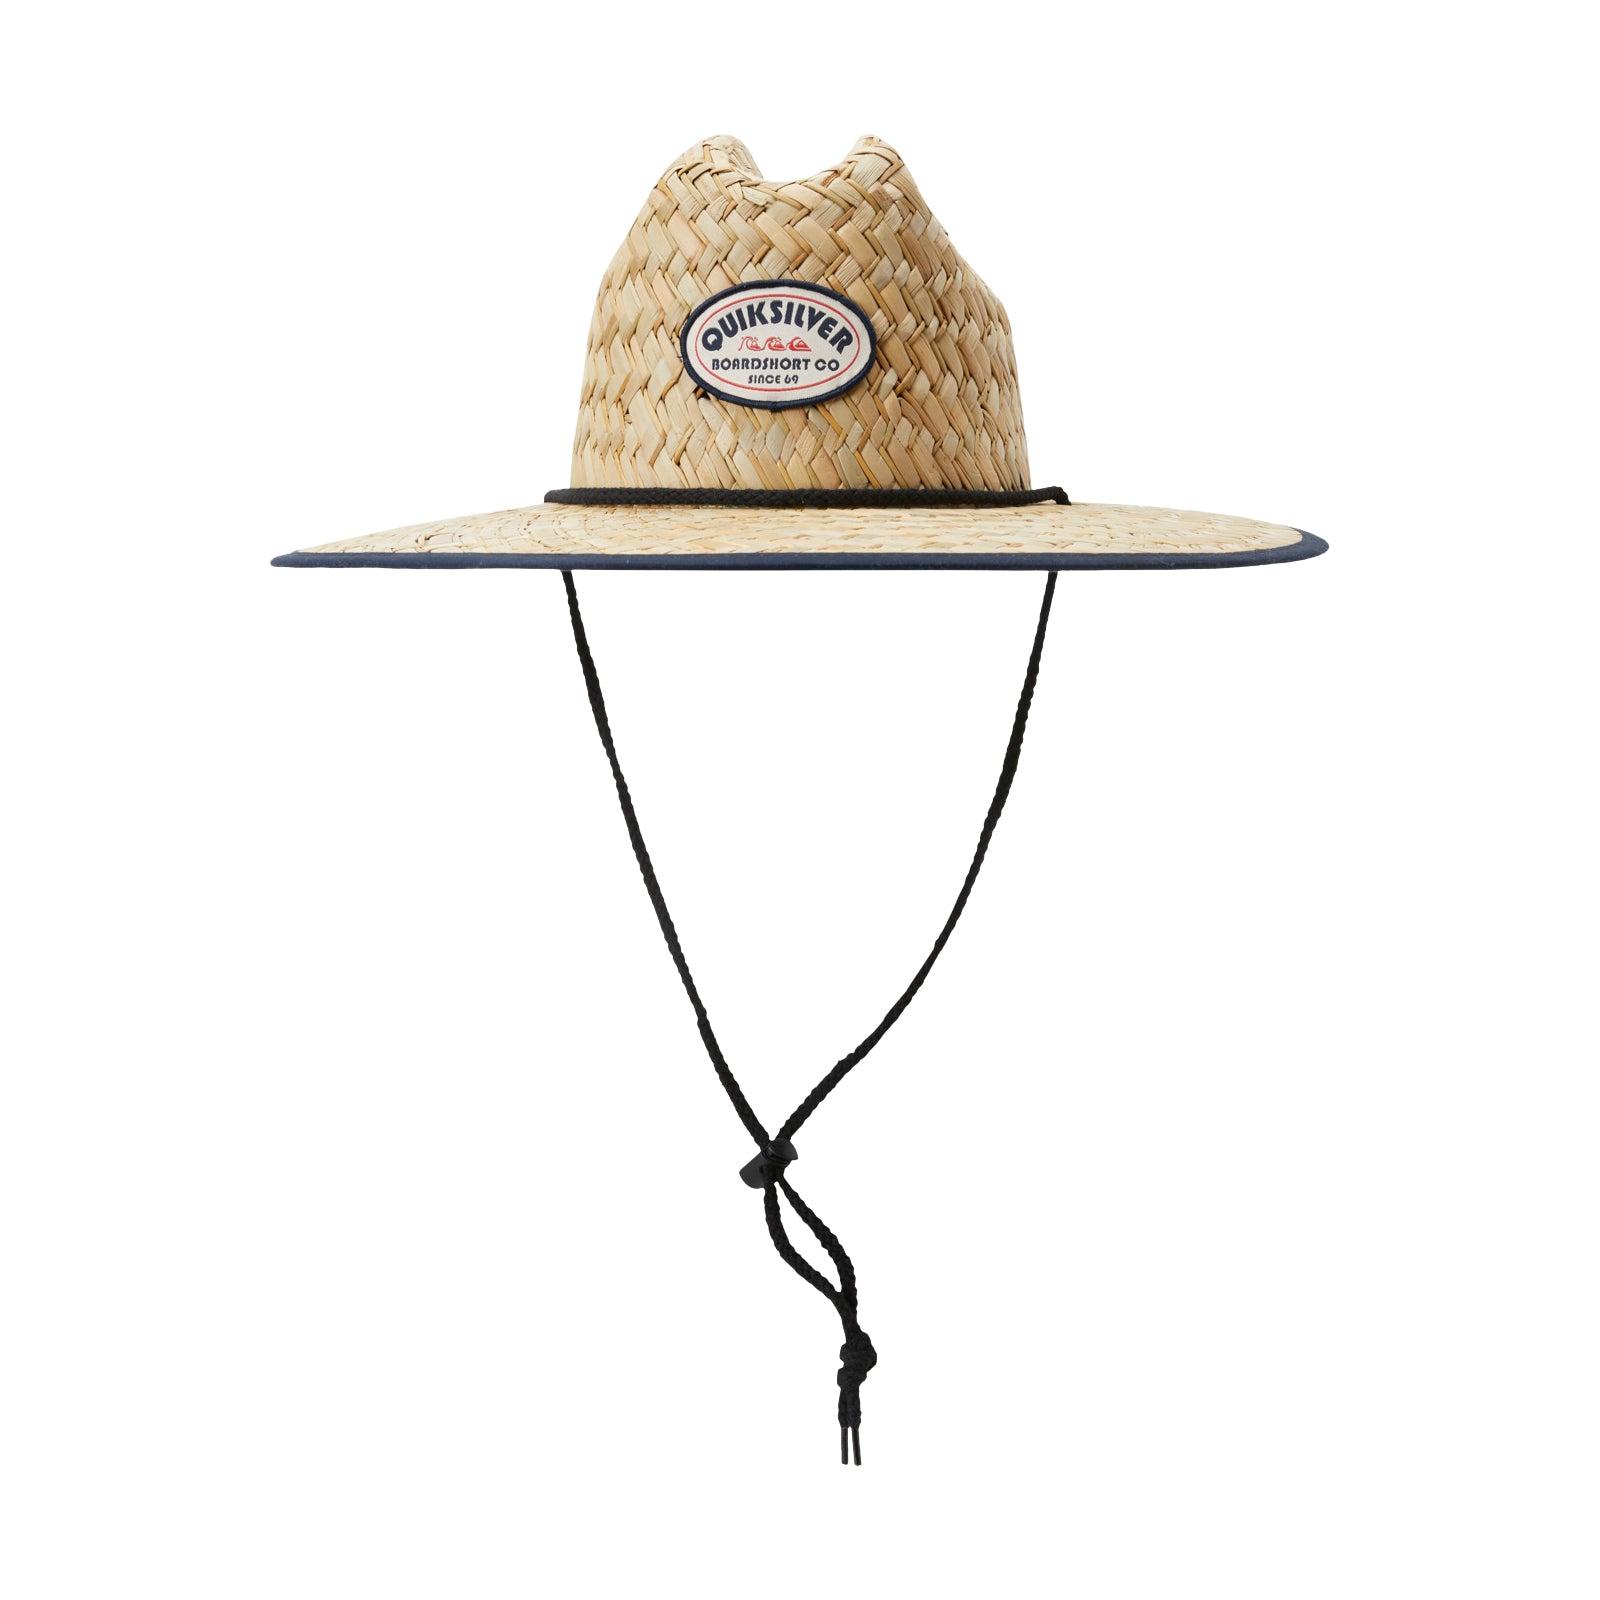 Quiksilver Outsider Americana Straw Lifeguard Hat BSL6 L/XL